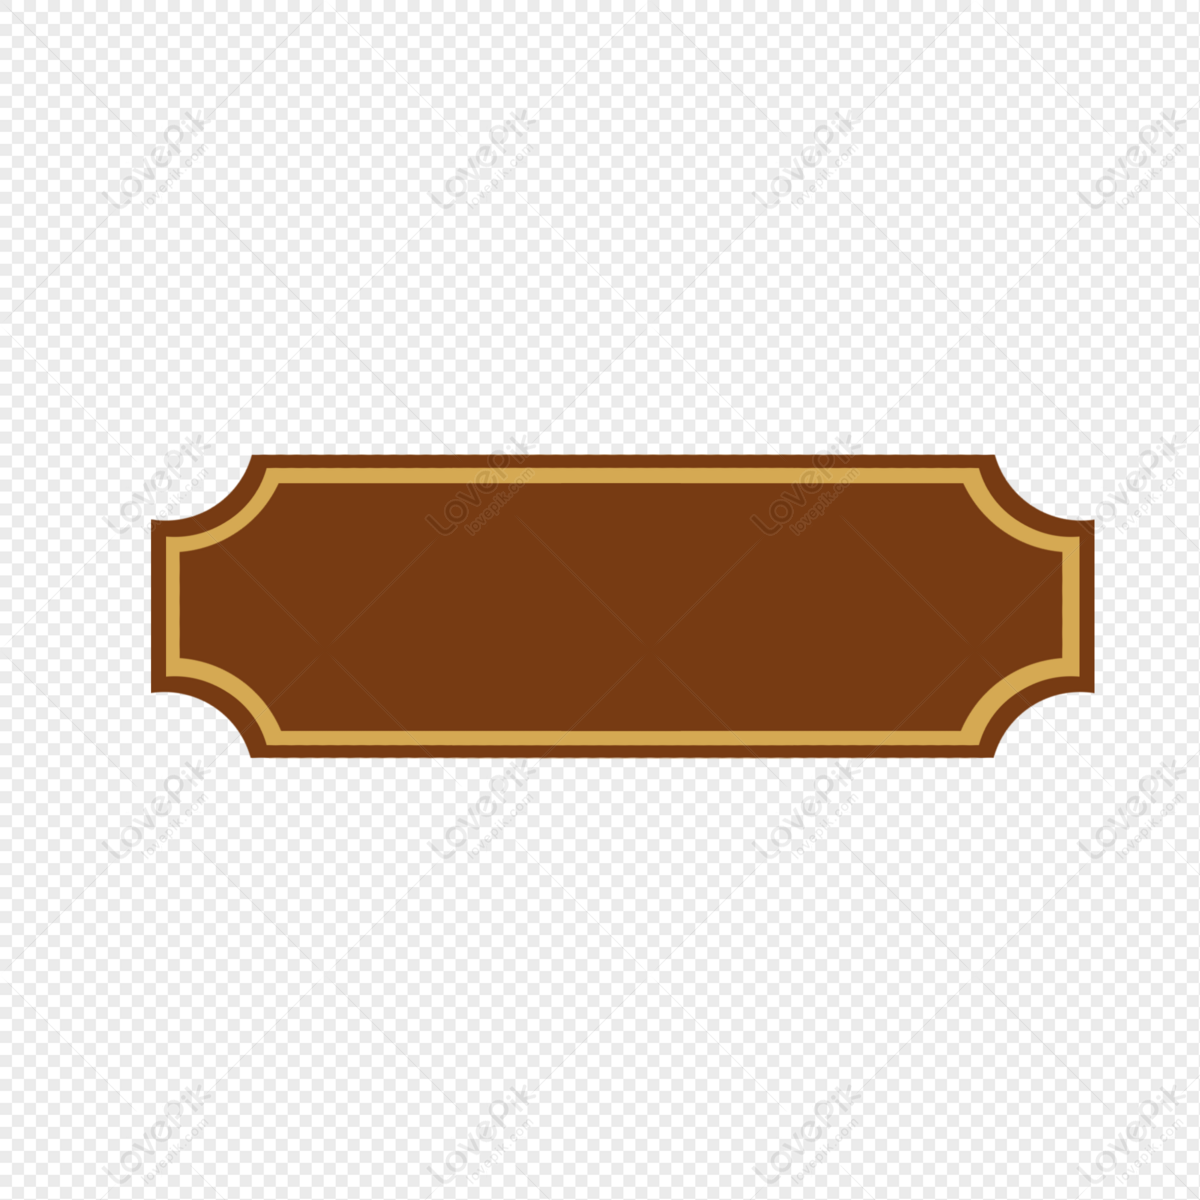 gold plaque clipart free